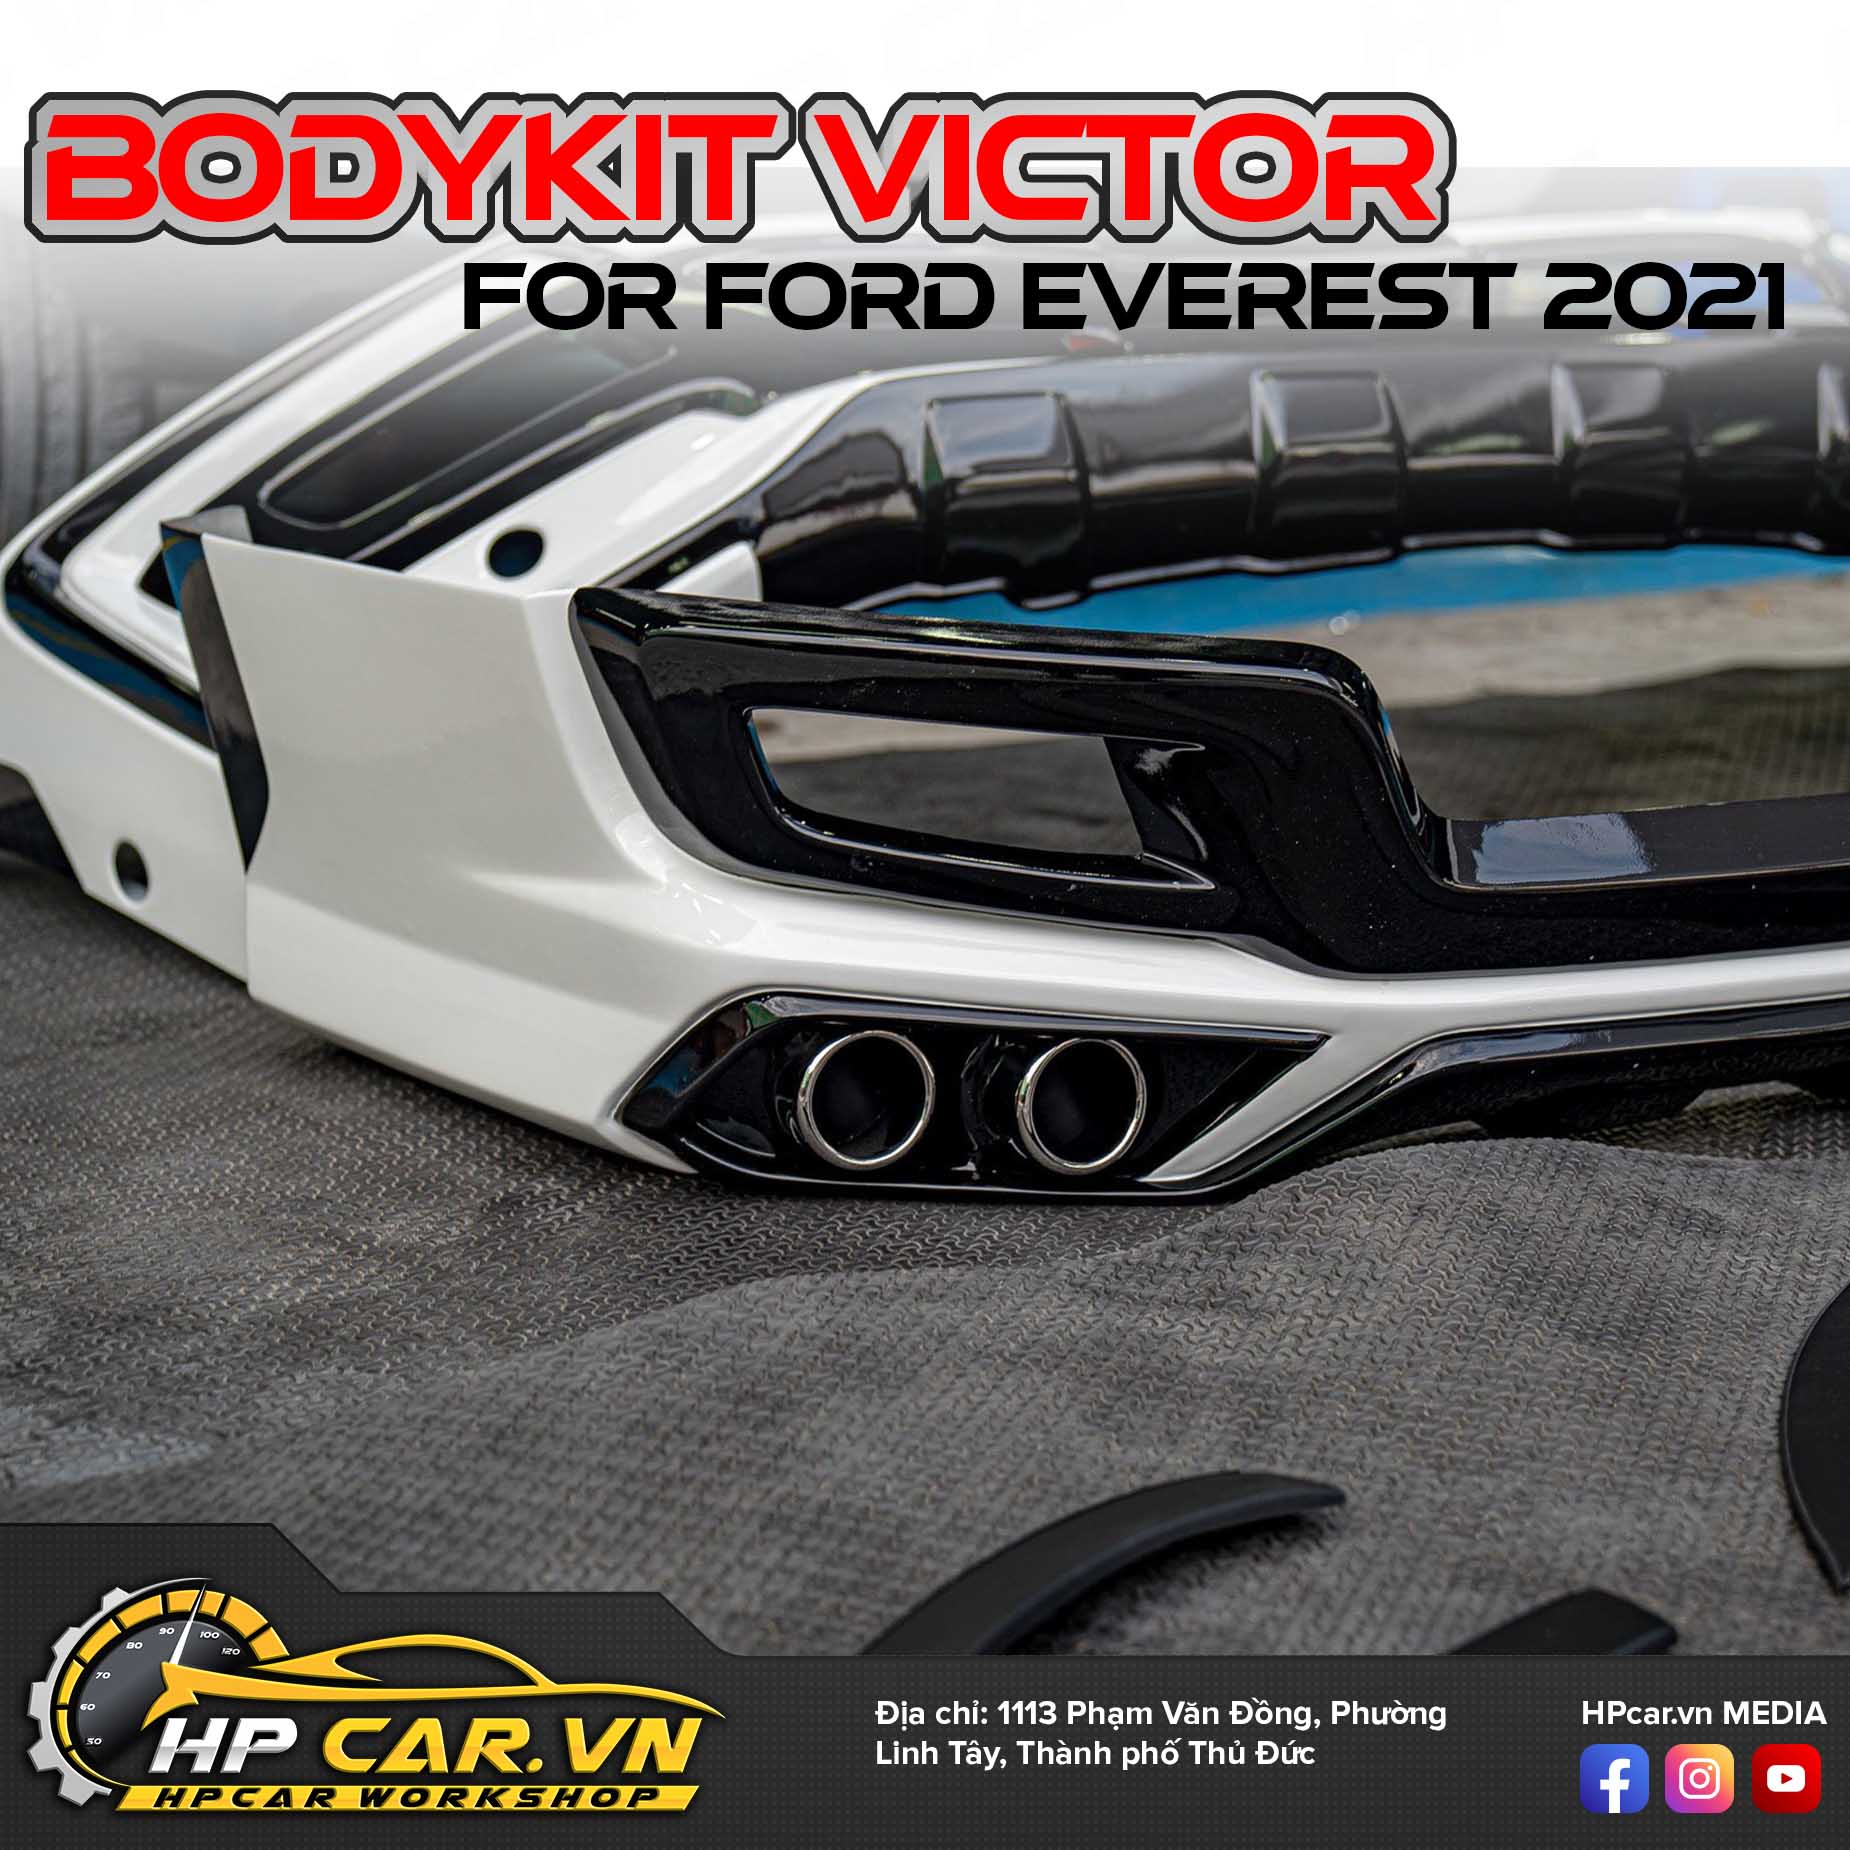 bodykit victor ford everest 2021 gia tot